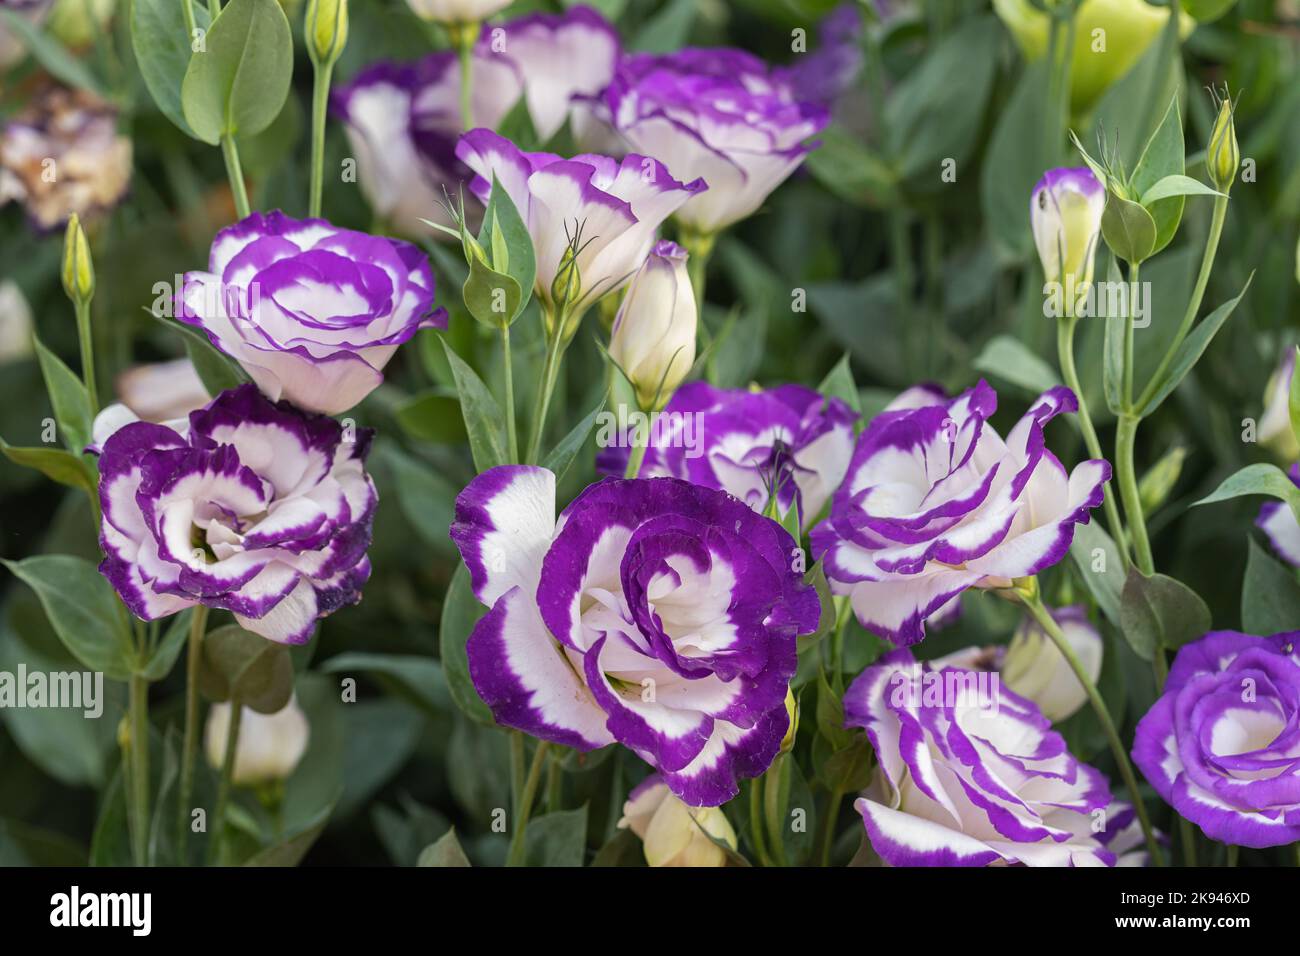 Close up of Lisianthus flowers or Eustoma plants blossom in flower garden. Stock Photo